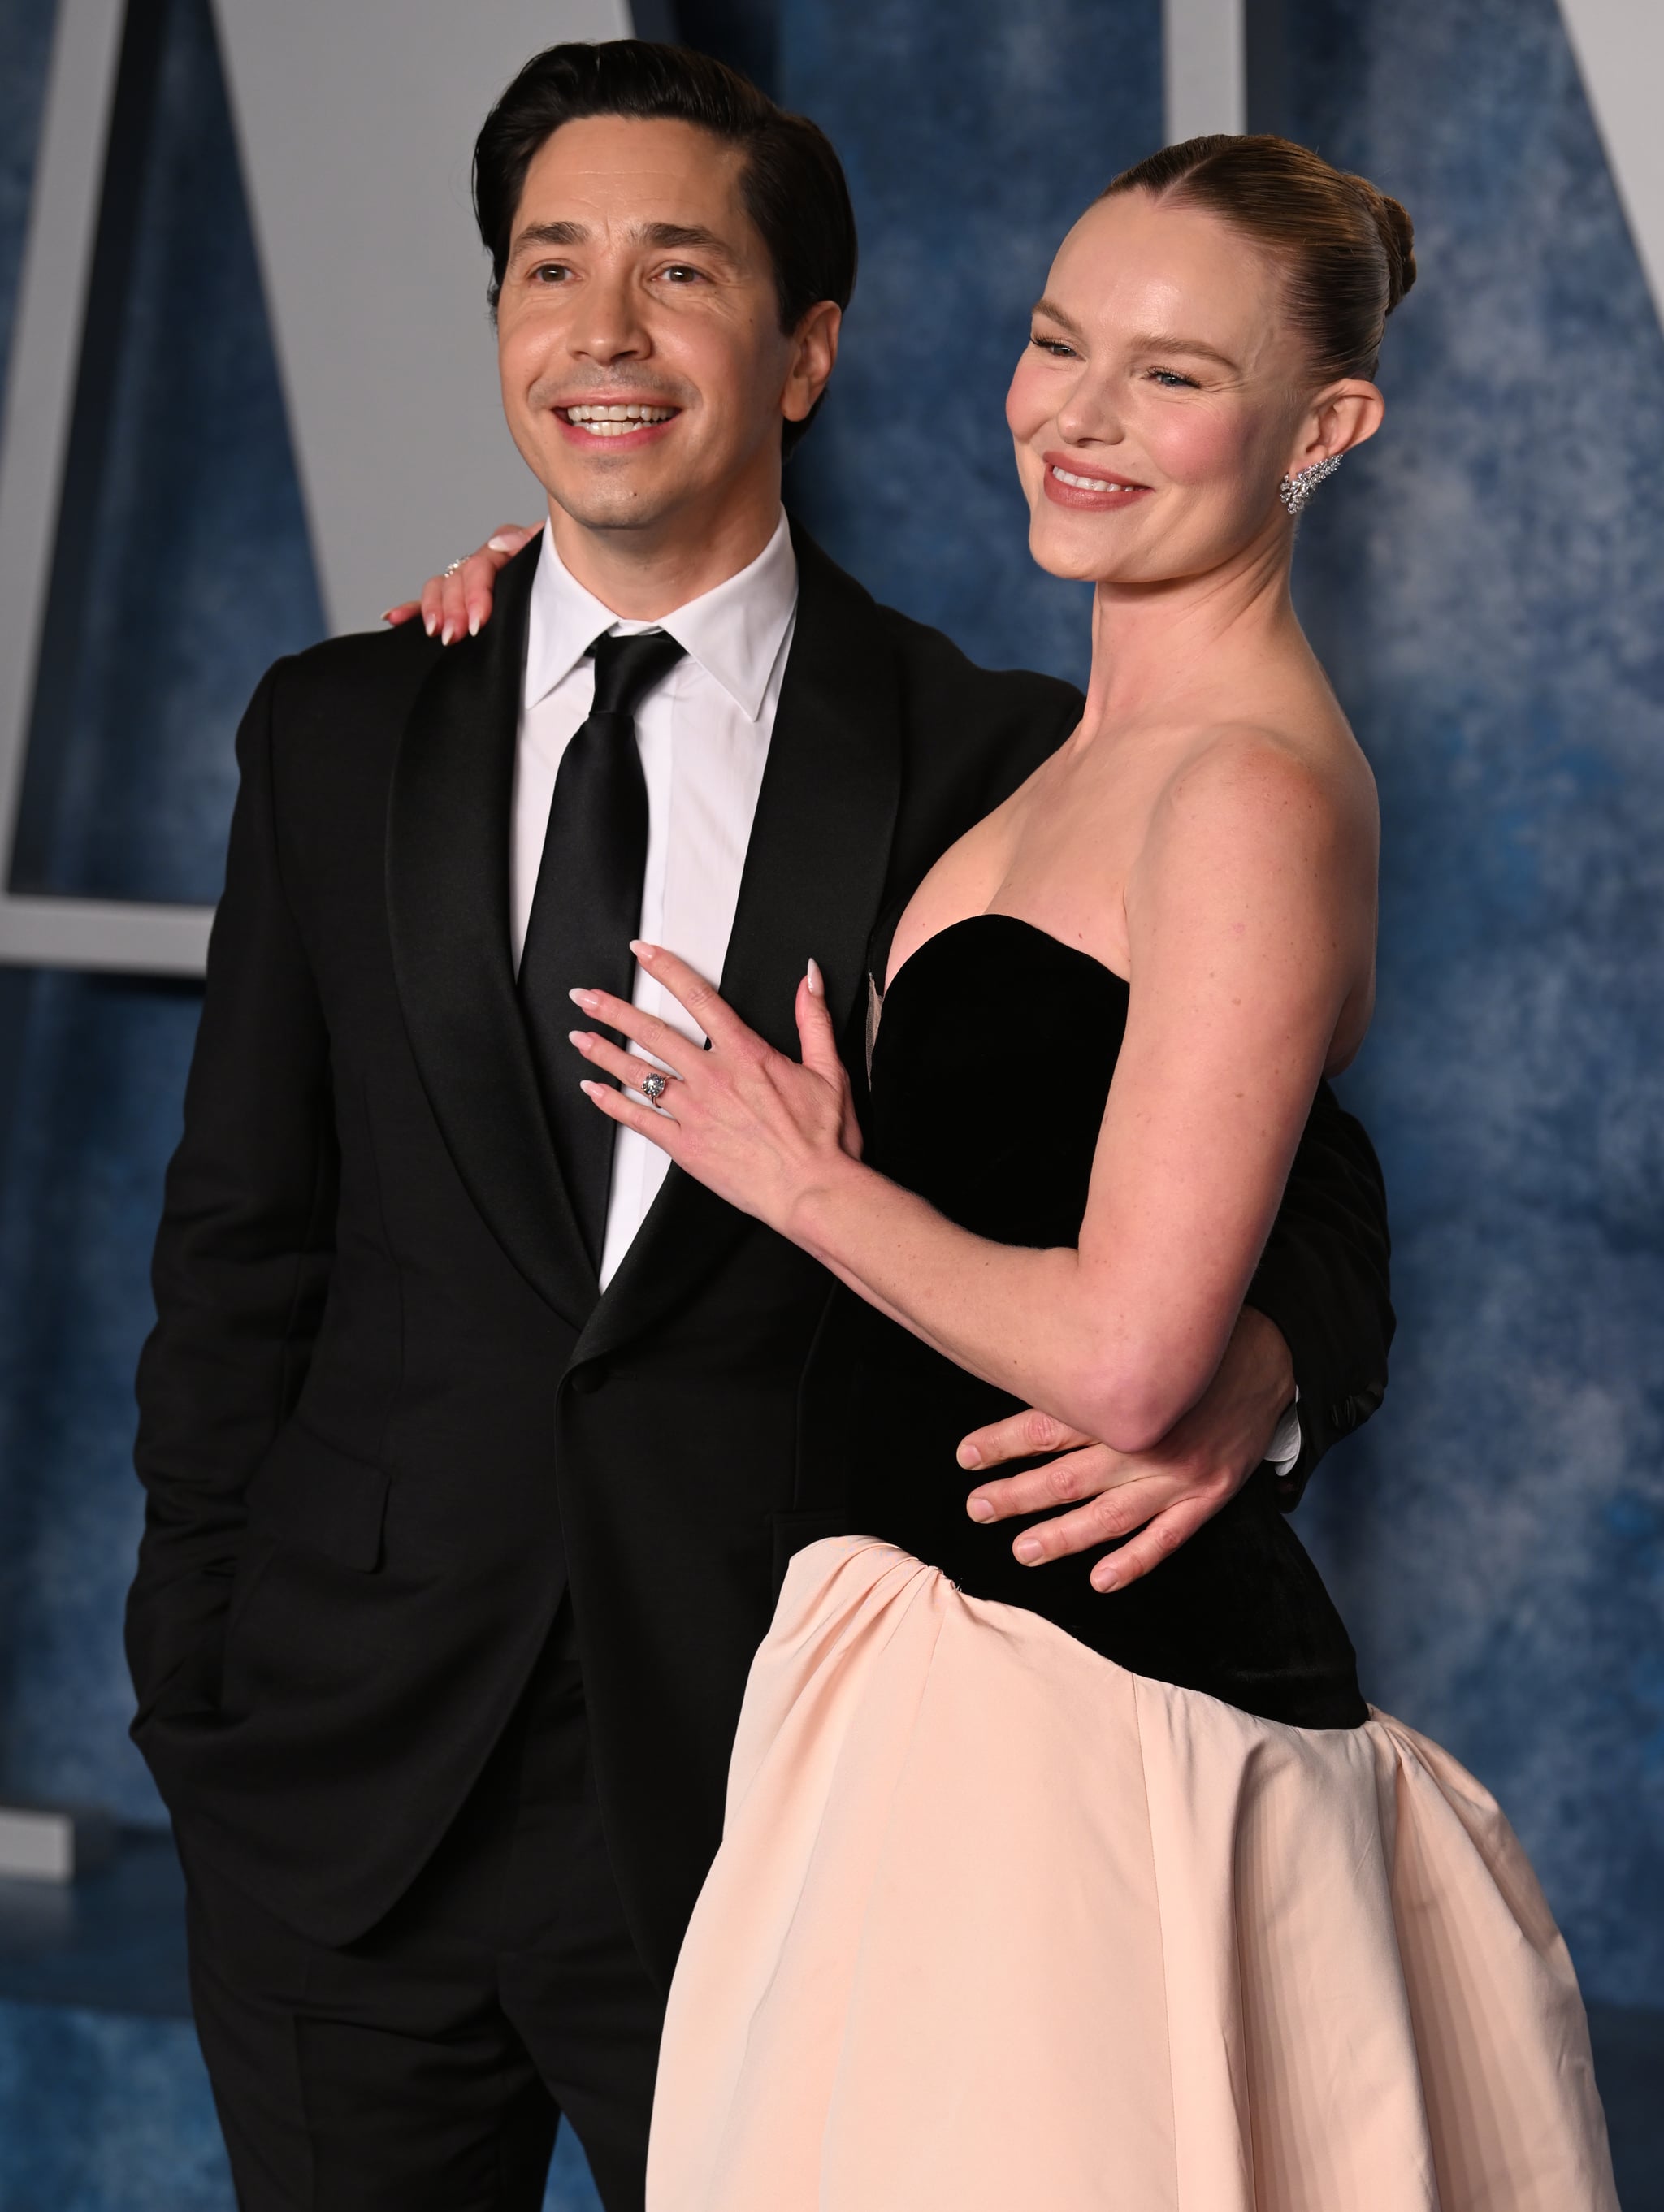 Justin Long and Kate Bosworth attending the Vanity Fair Oscar Party held at the Wallis Annenberg Center for the Performing Arts in Beverly Hills, Los Angeles, California, USA. Picture date: Sunday March 12, 2023. (Photo by Doug Peters/PA Images via Getty Images)